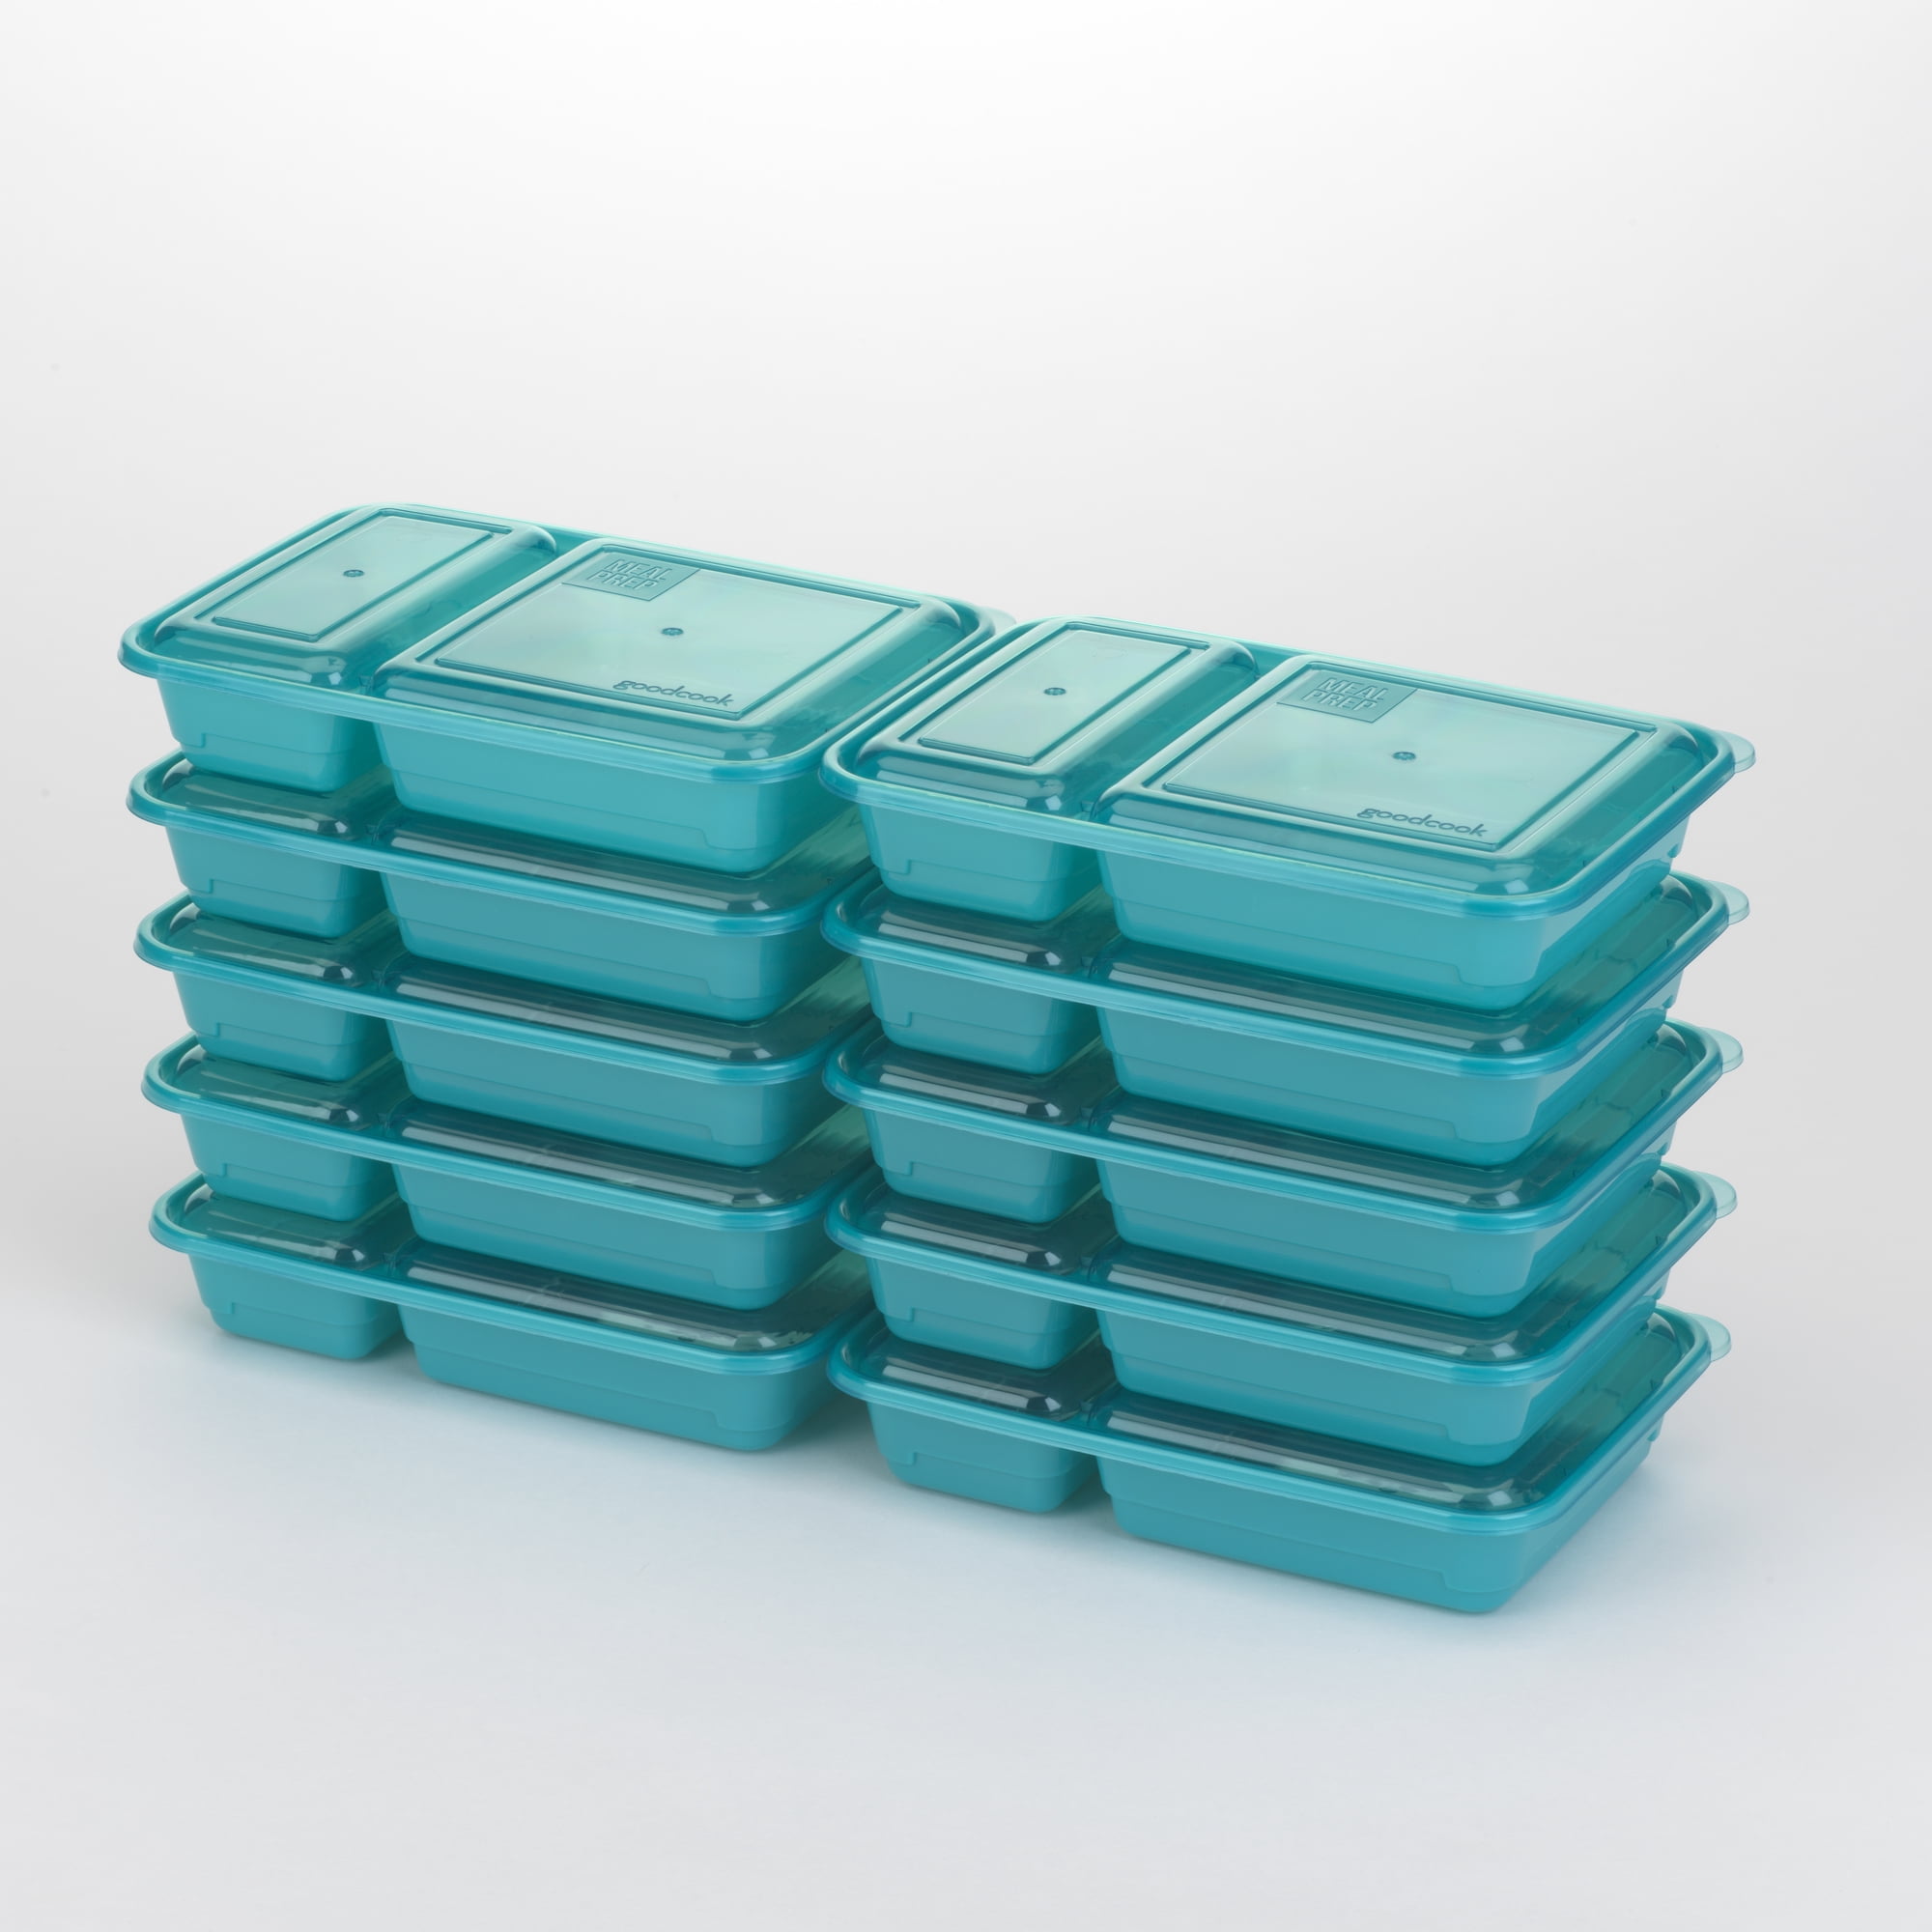 GoodCook EveryWare Food Container 4-pack Set Extra Large Rectangles